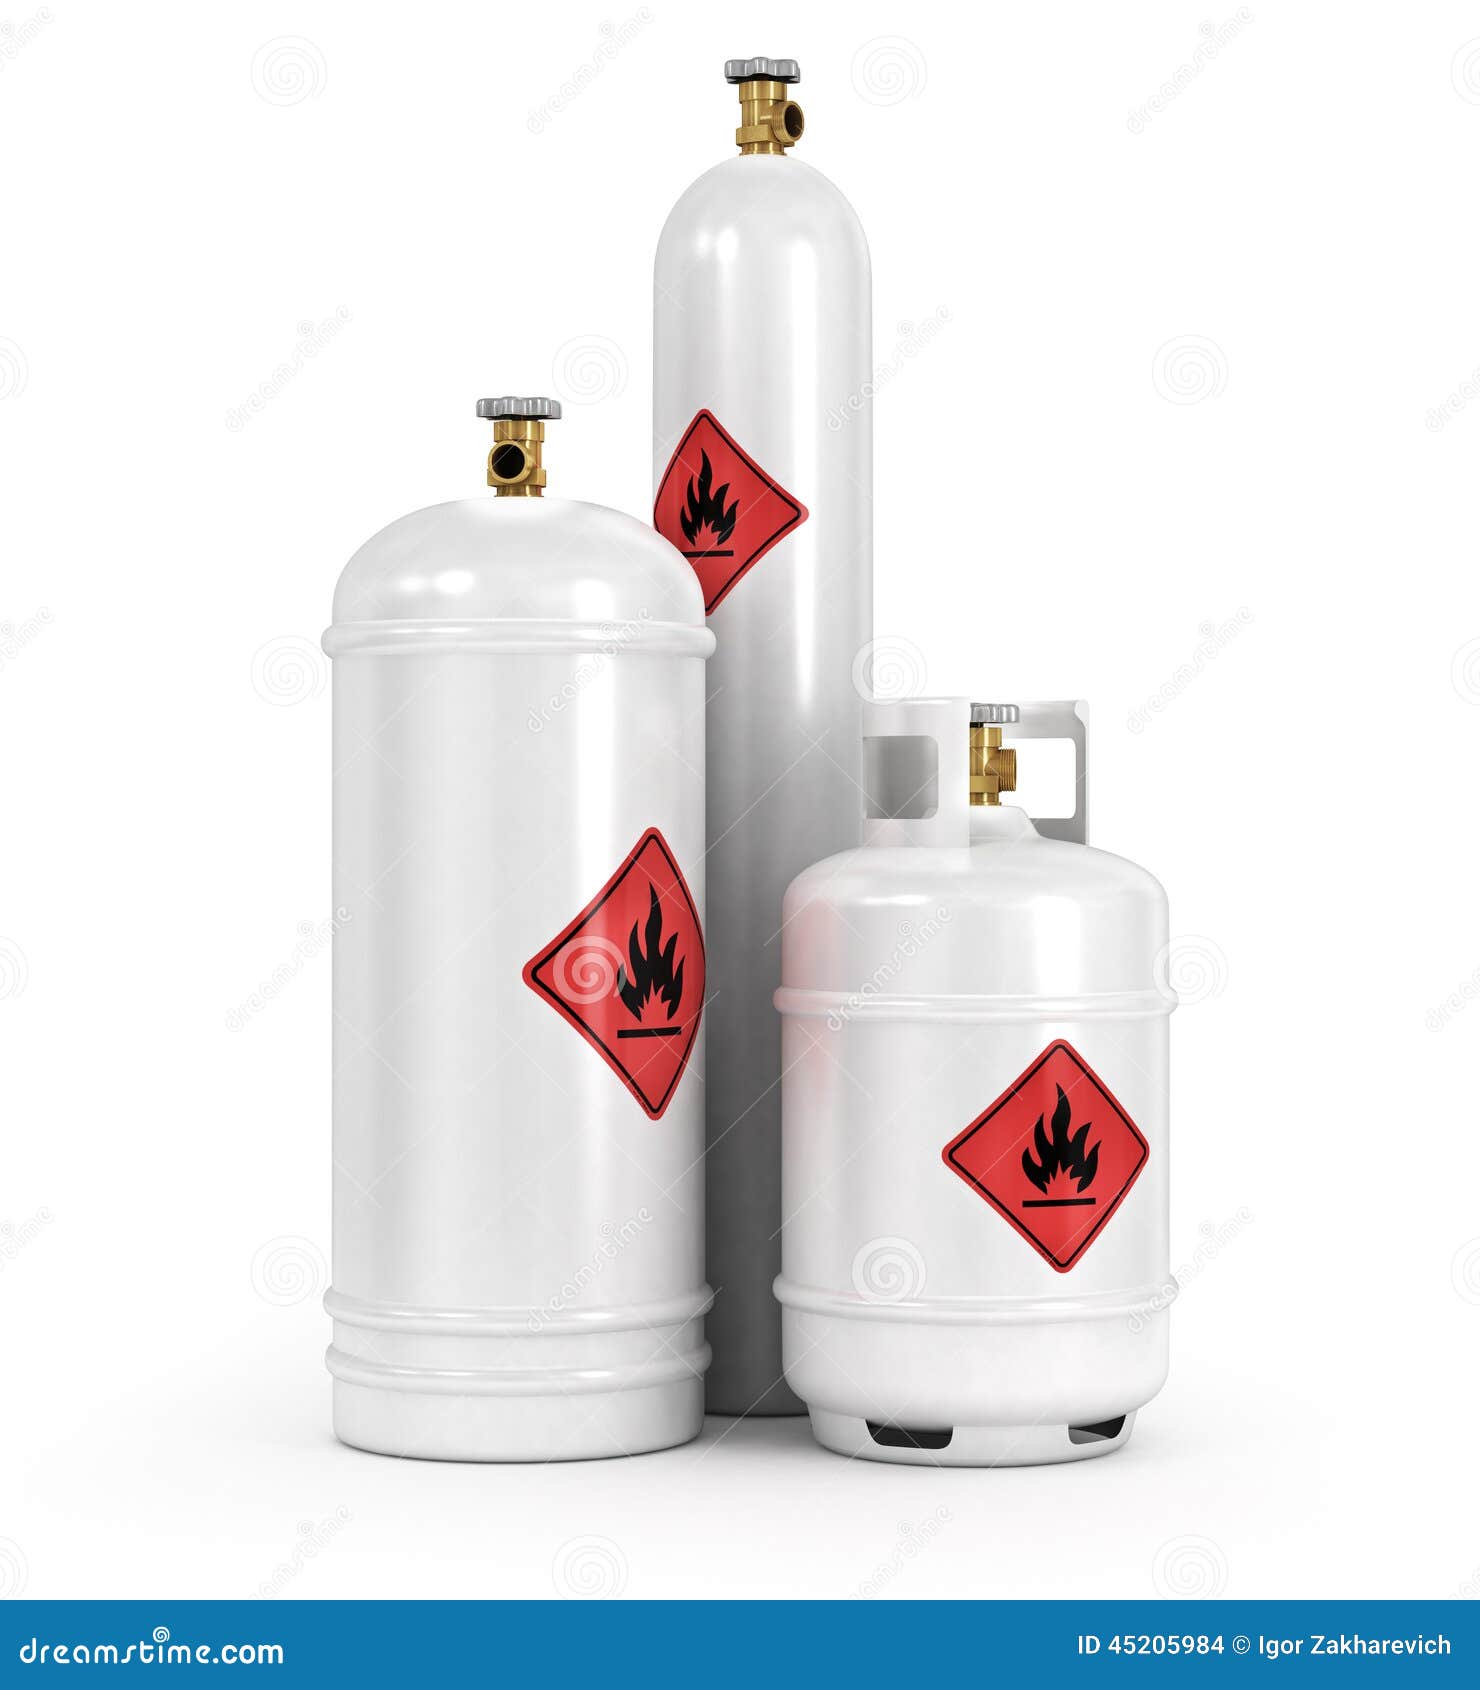 cylinders with the compressed gases